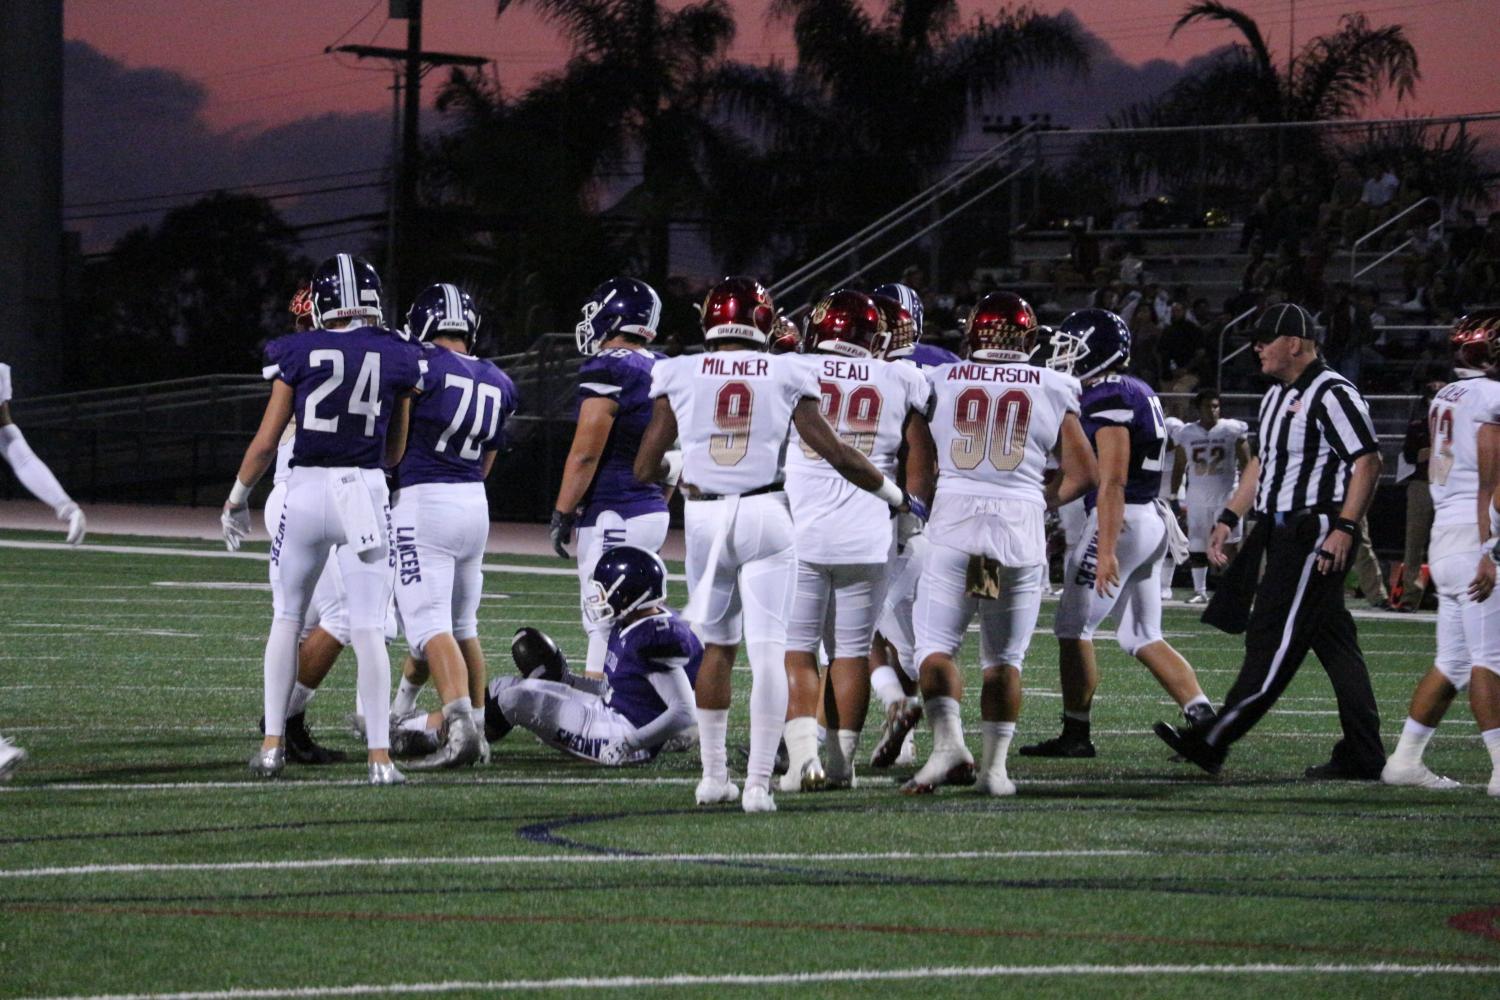 Mission Hills beats Carlsbad 35-7 after a tough game on Friday, Sept. 15.